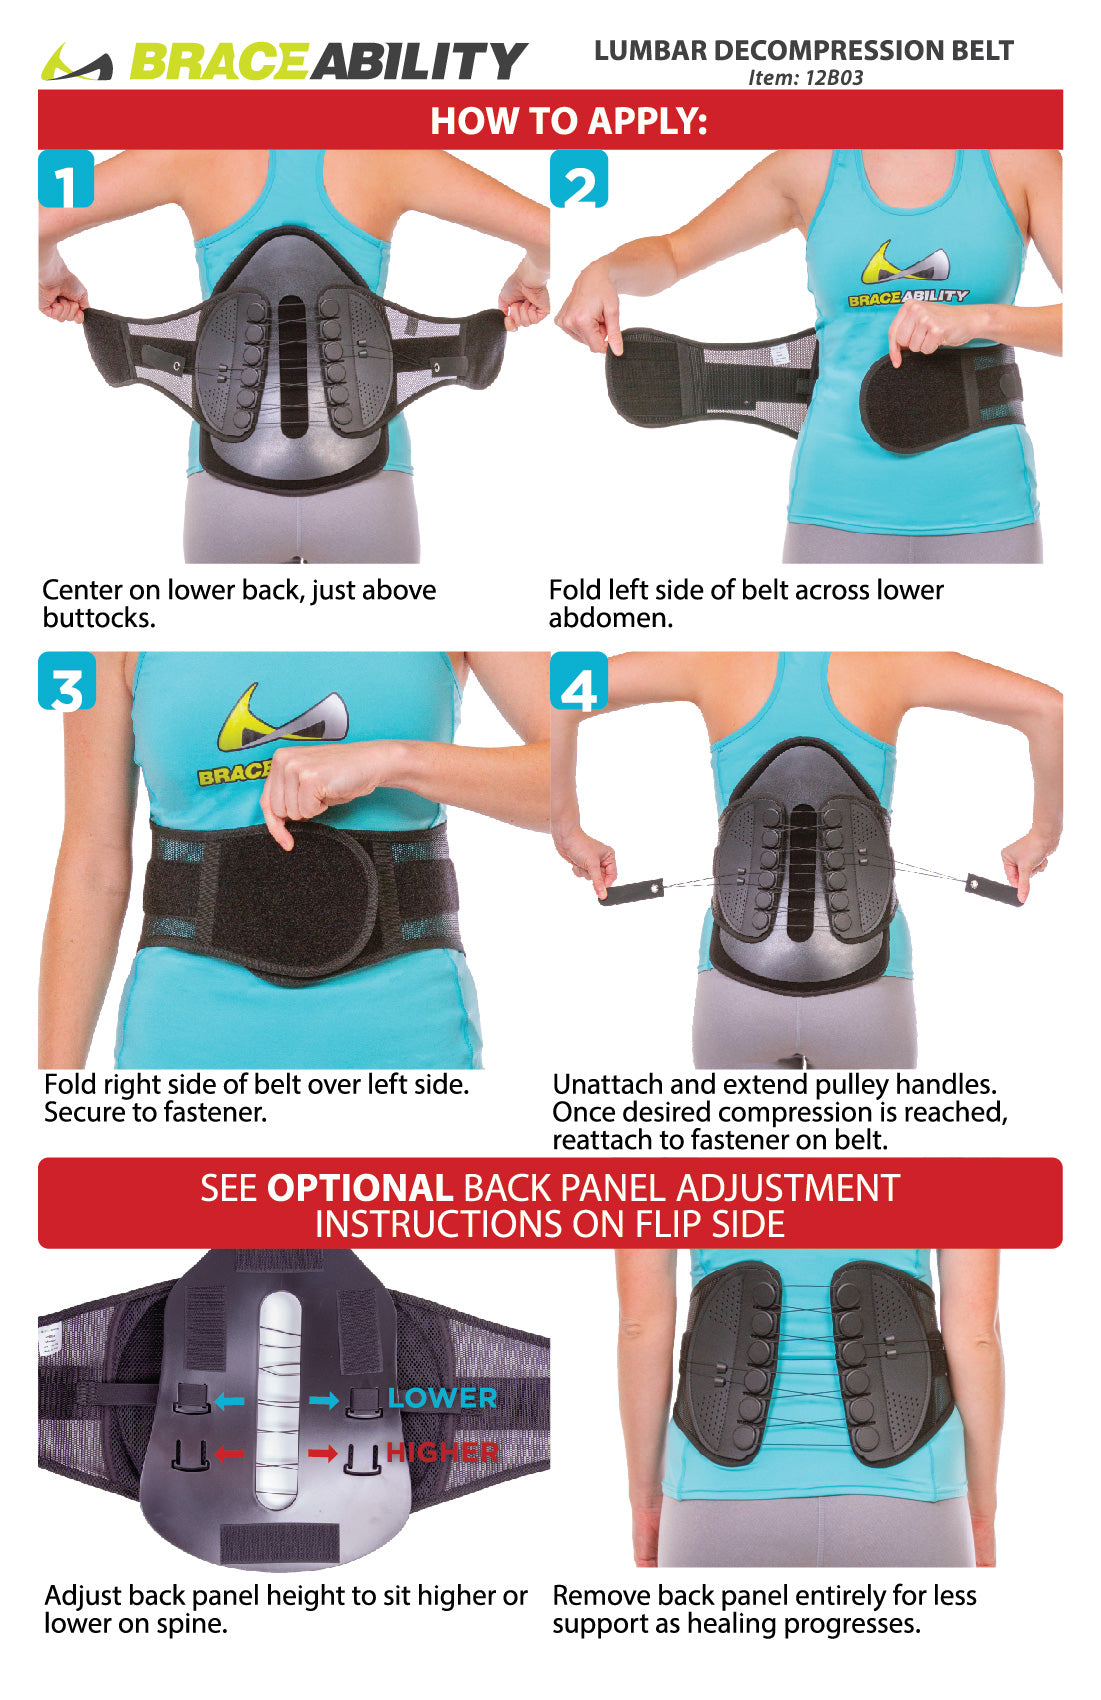 the instruction sheet for the lumbar decompression belt is a simple wrap-around style